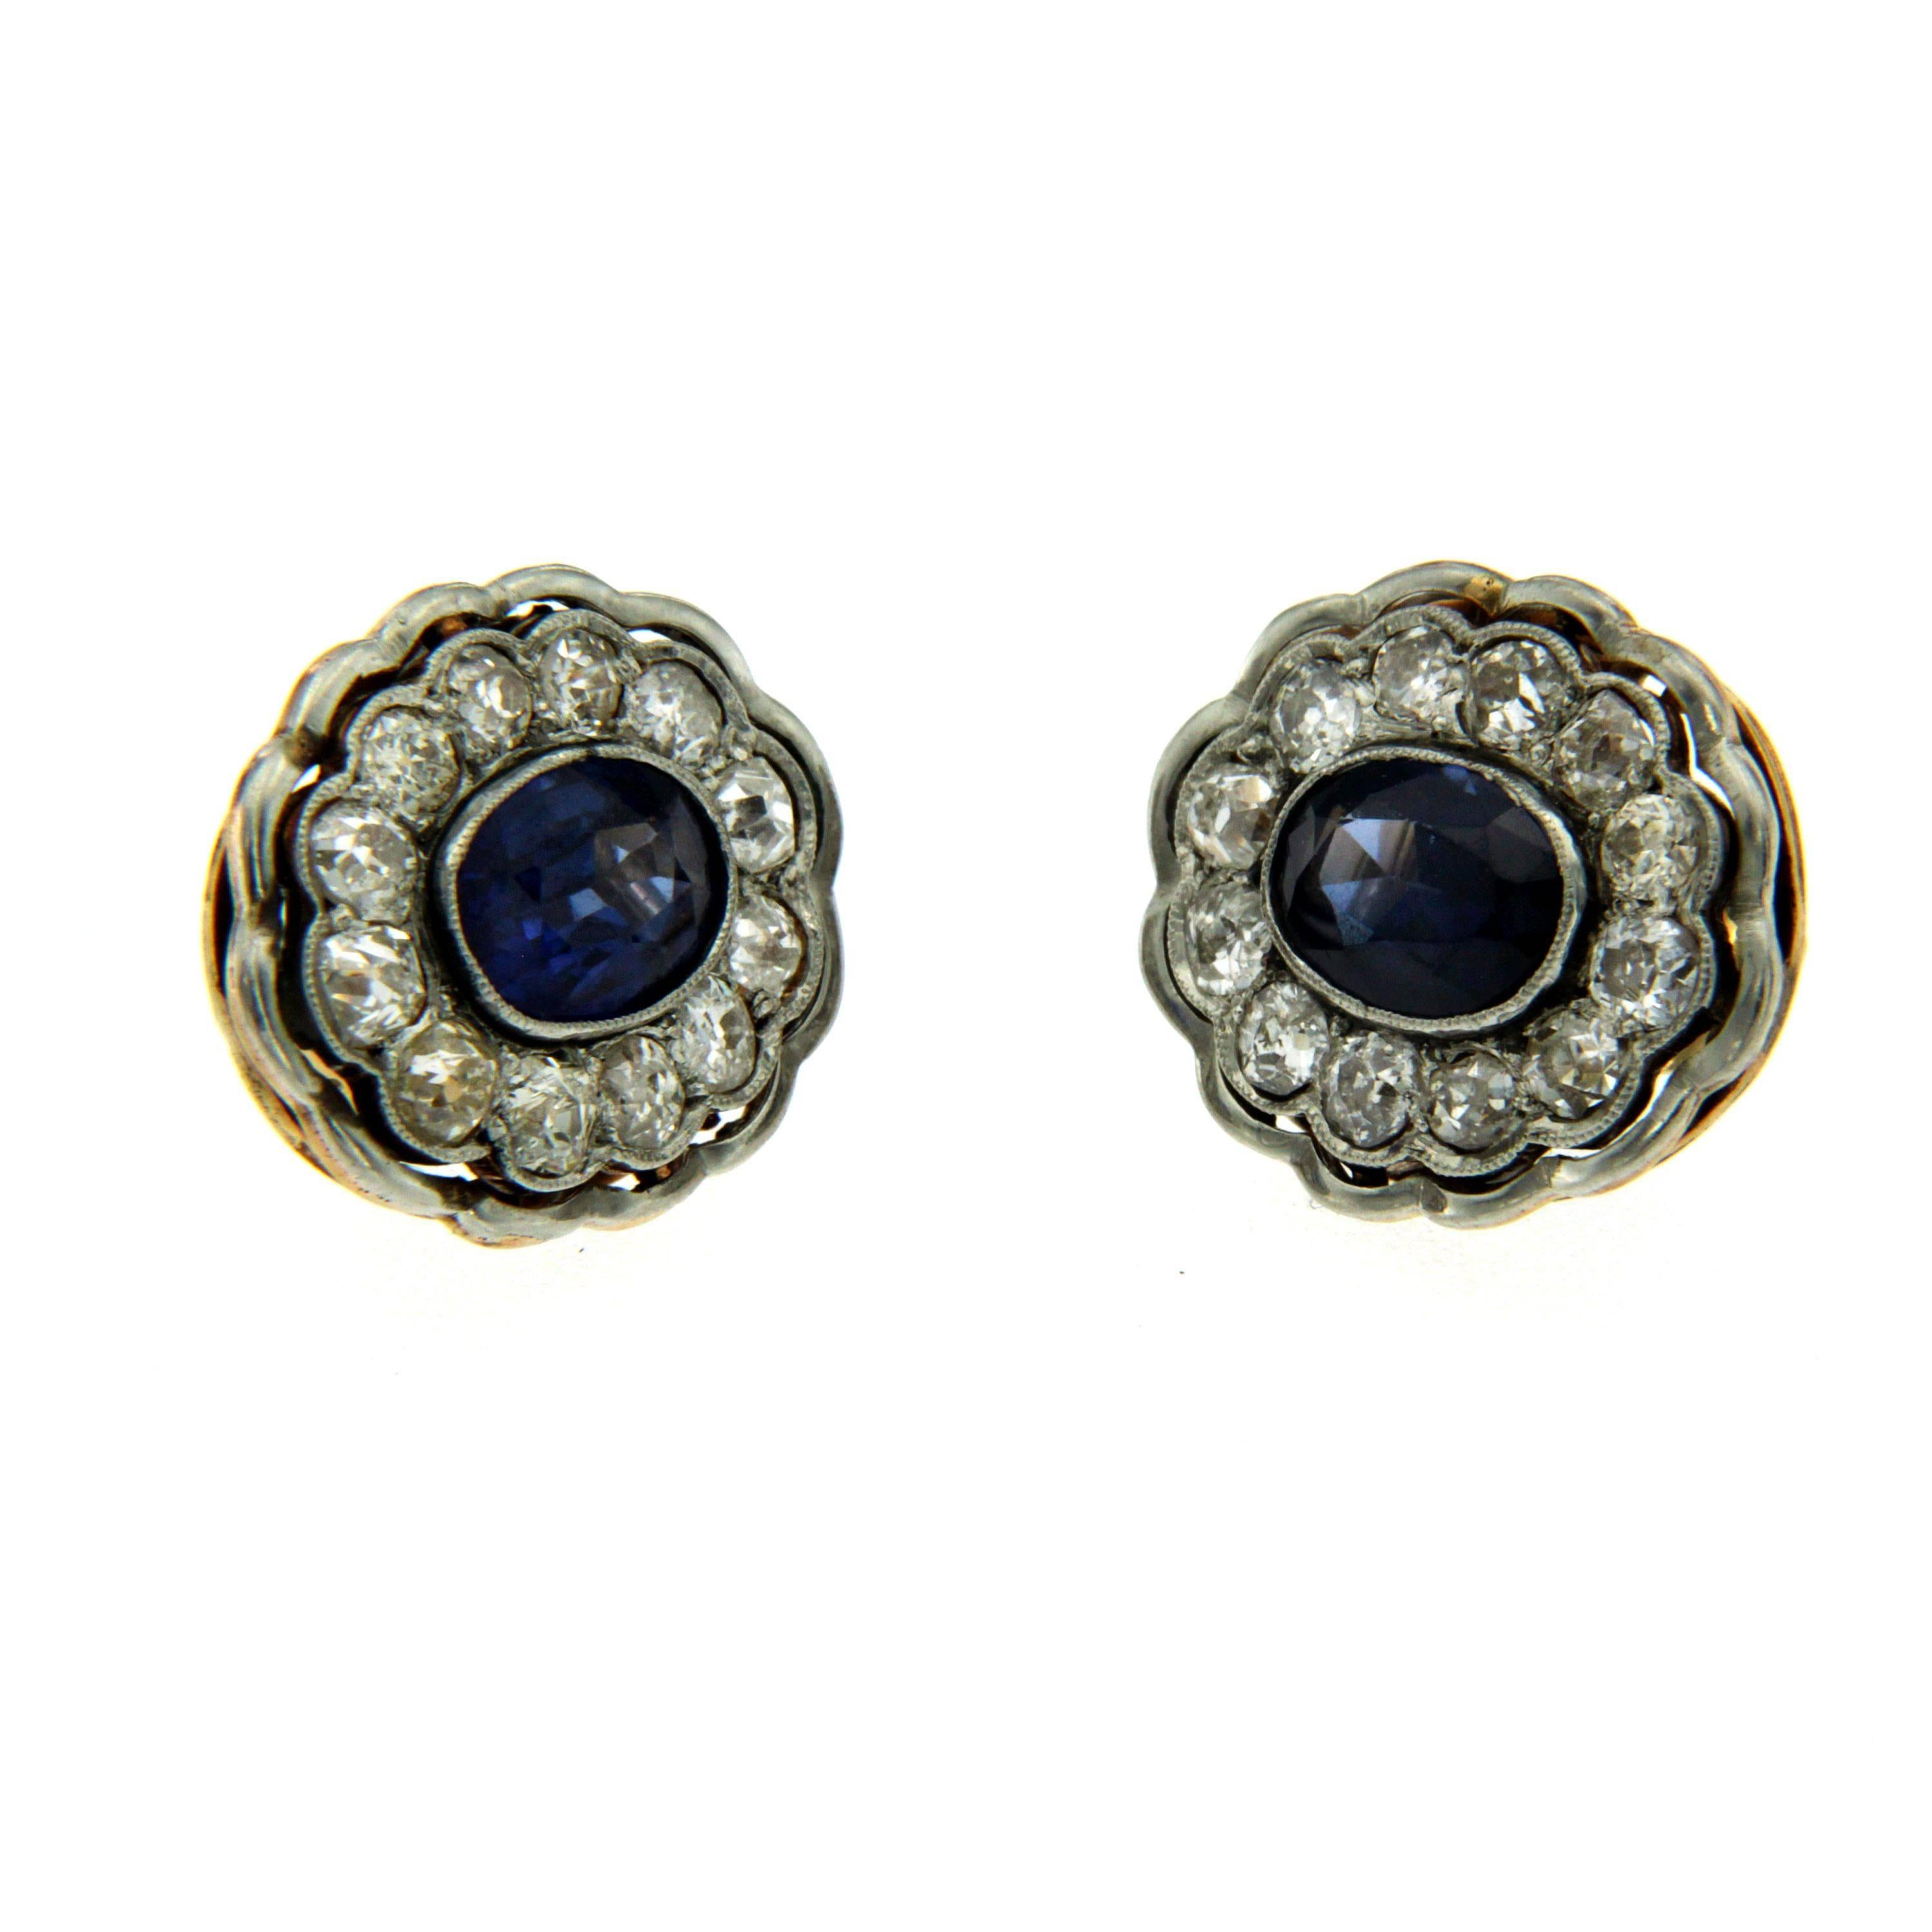 Victorian 18 karat gold synthetic sapphire and diamond earrings. These gorgeous sapphire and diamond clusters feature 2 center synthetic sapphires that are approximately 2.00 carats each along with an approximate total diamond weight of 3.00 carats